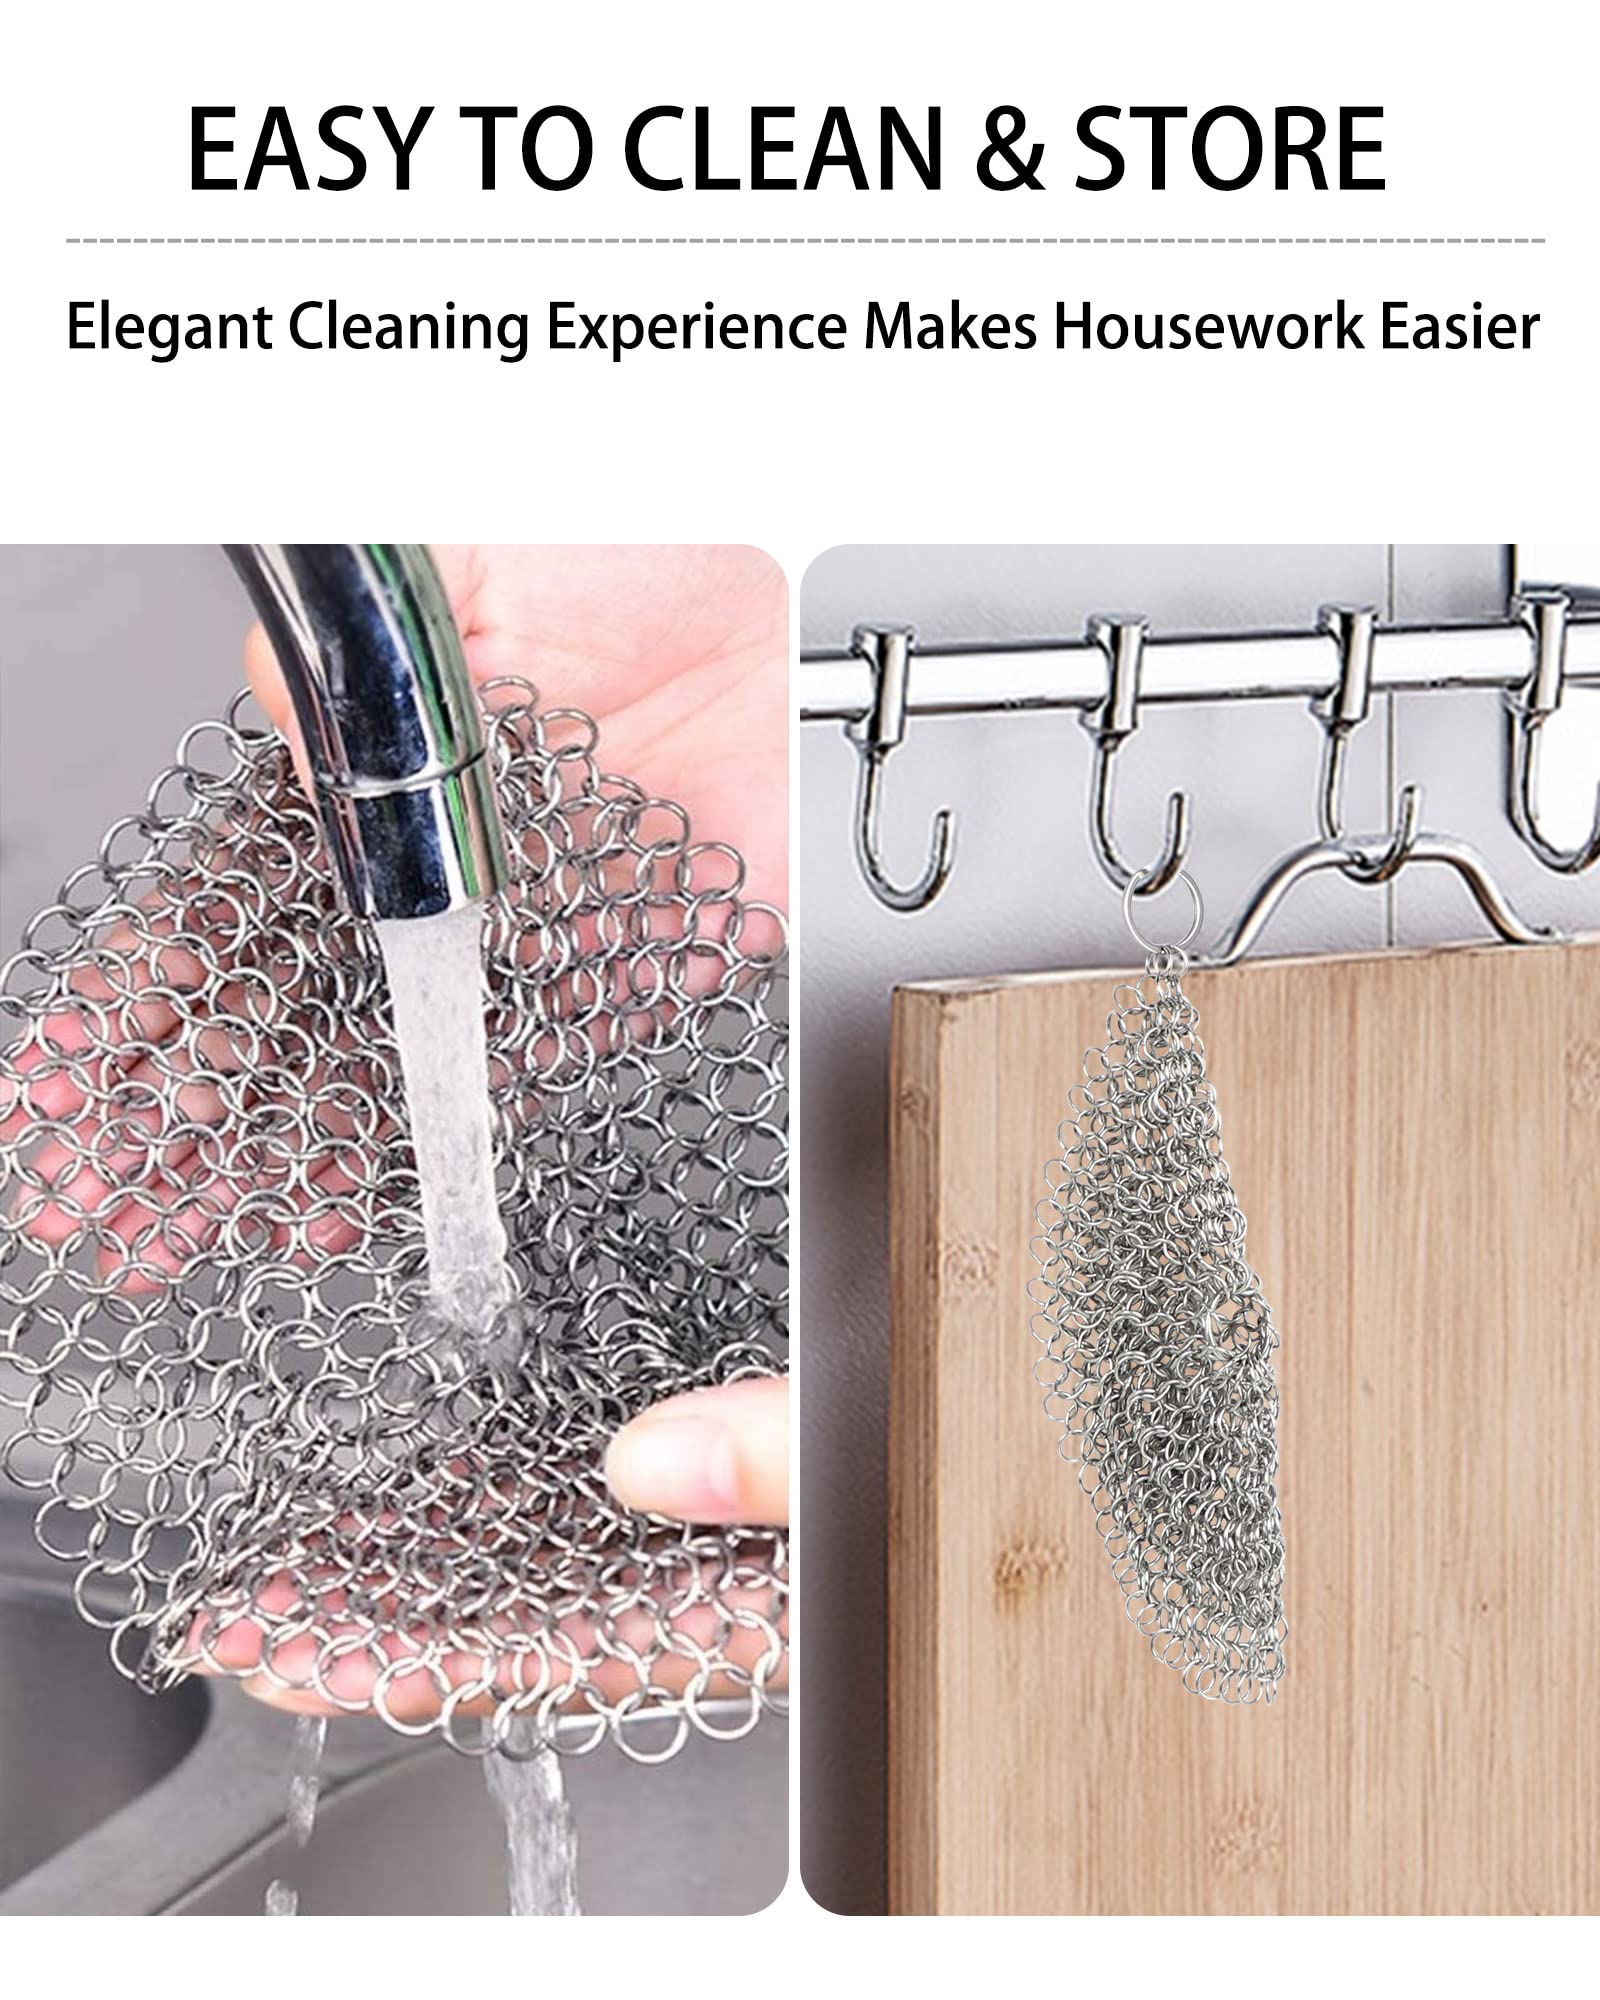 ONEEKK Cast Iron Cleaner Chainmail Scrubber 316L Stainless Steel Chain Scrubber for Cast Iron Cleaning, Chain Mail to Clean Cast-Iron Pans Pots Skillet Scrub Non-Scratch (7 Inch Round)